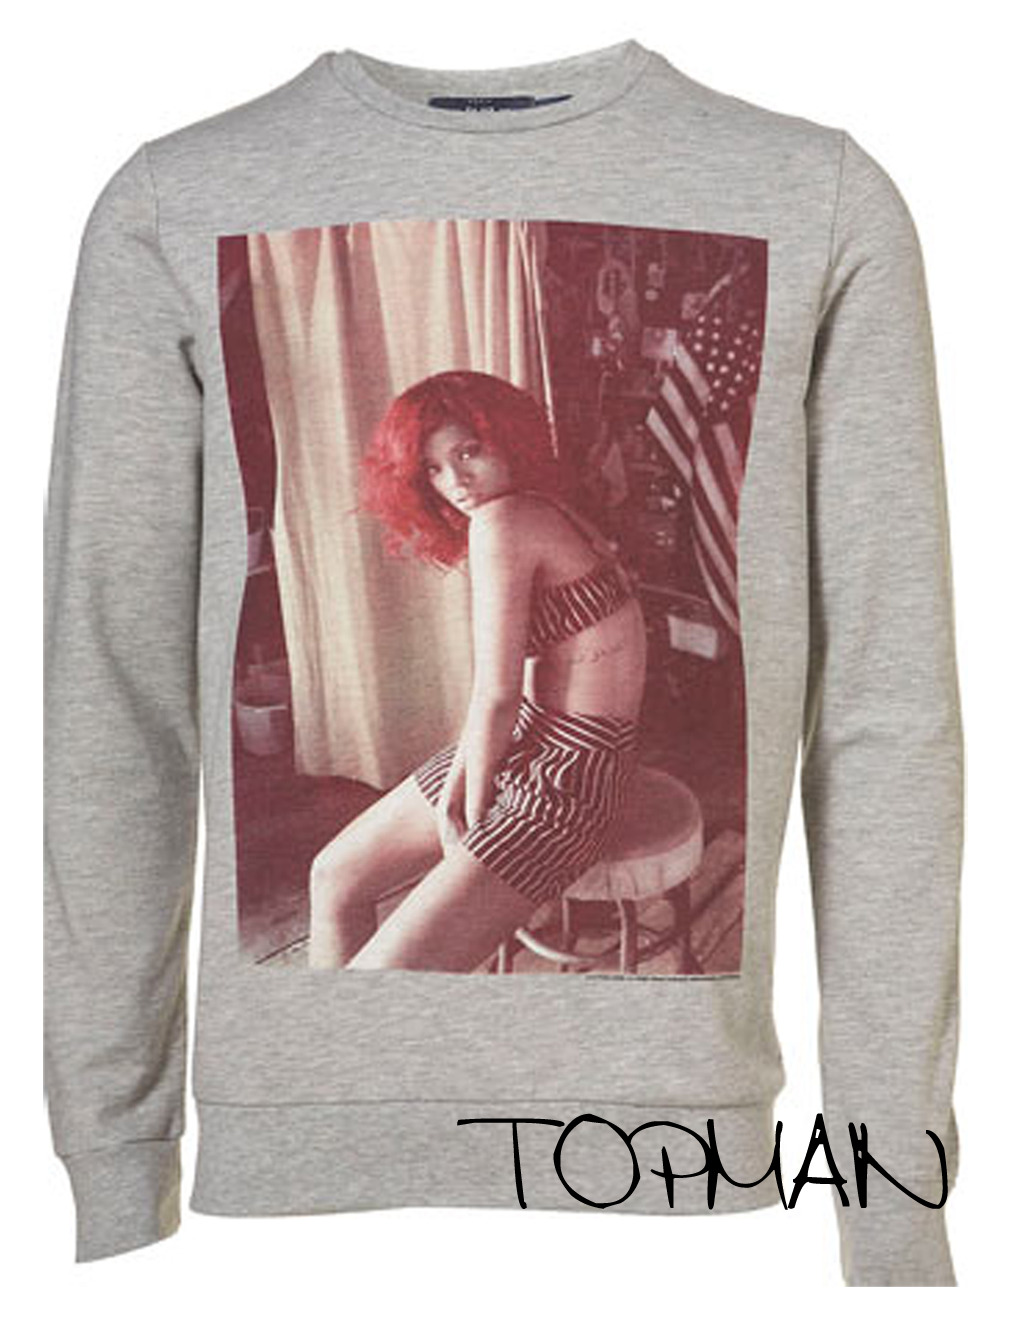 Grey Rihanna print sweatshirt from Topman for £32.00 ($60.00). Available on their main site HERE
Thanks to talkthatfuckingtalk for the info :)